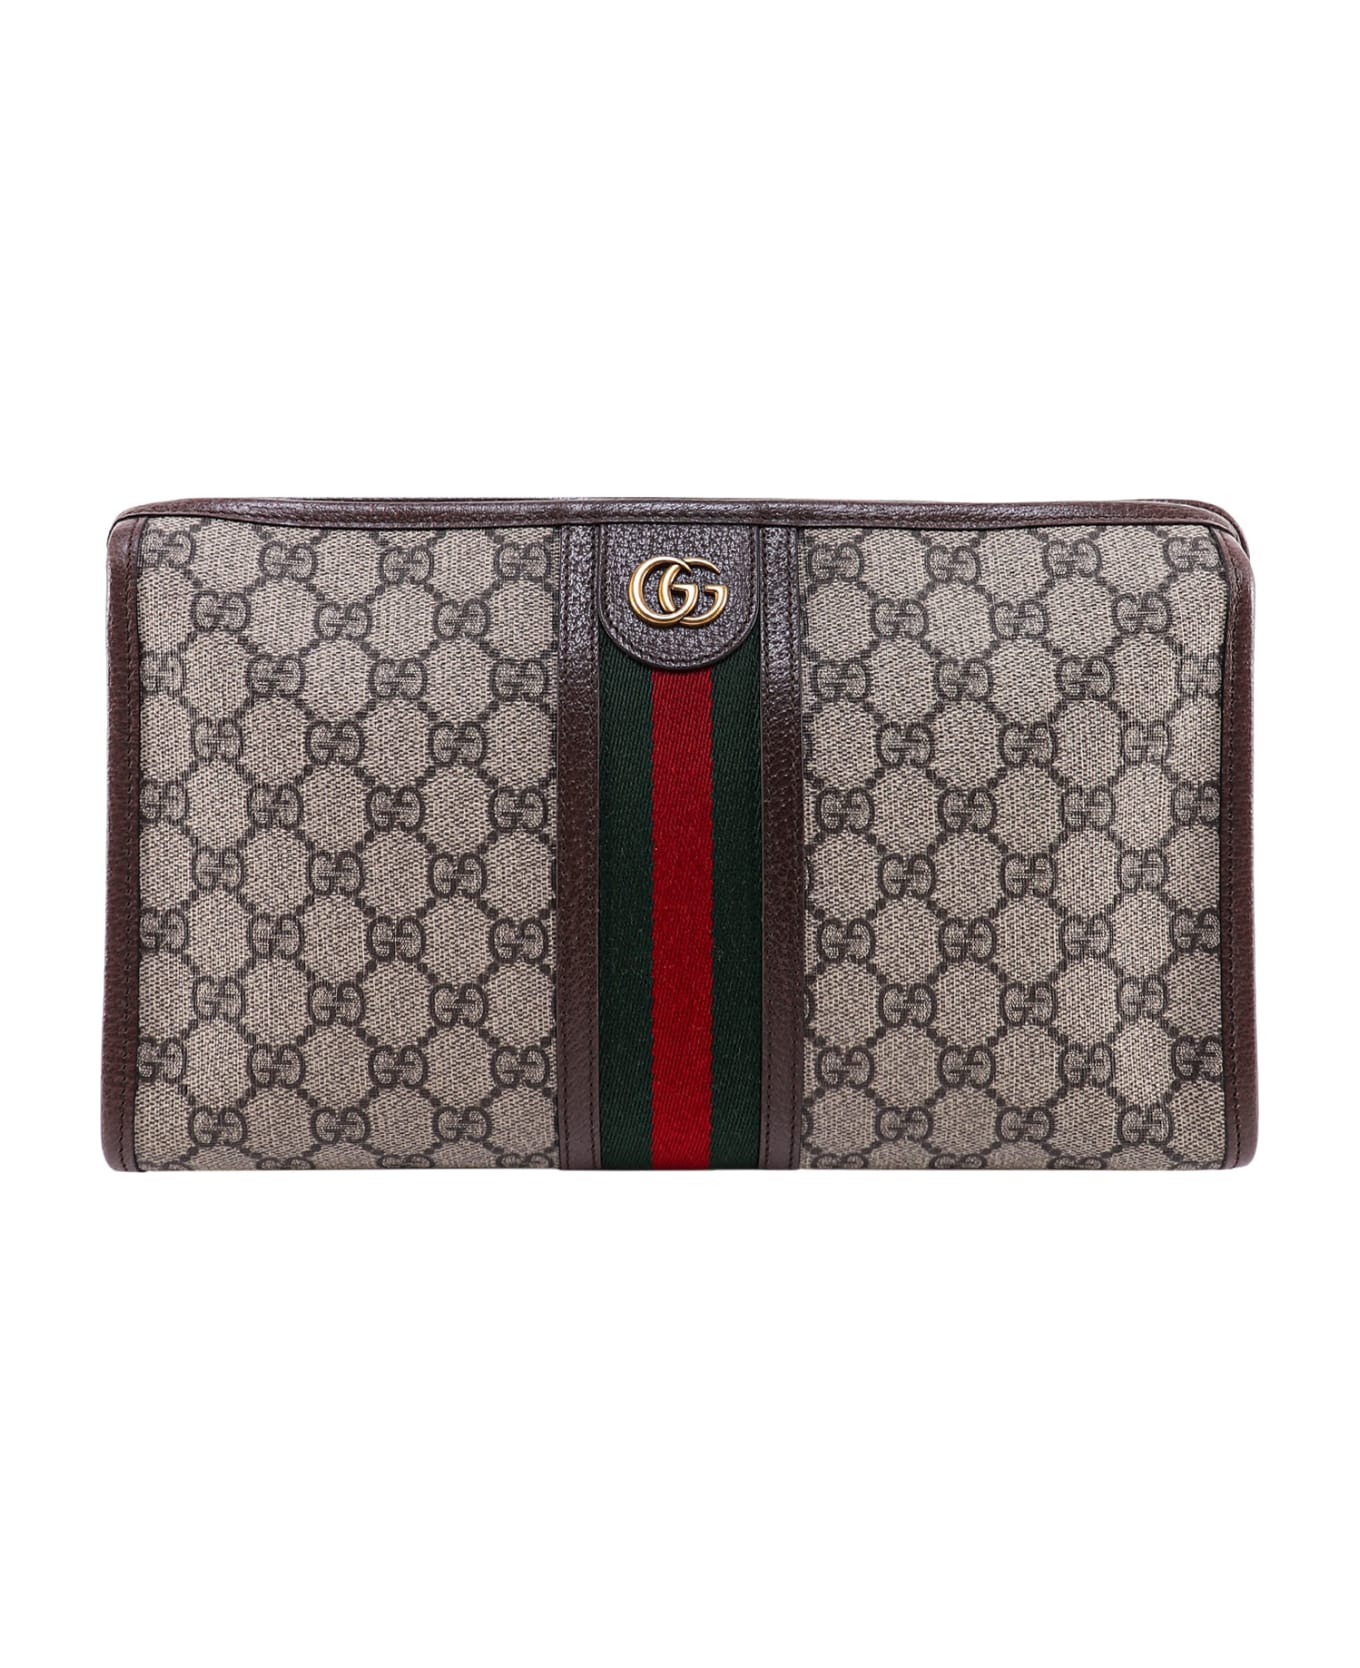 Gucci Ophidia Gg Beauty Case - Brown